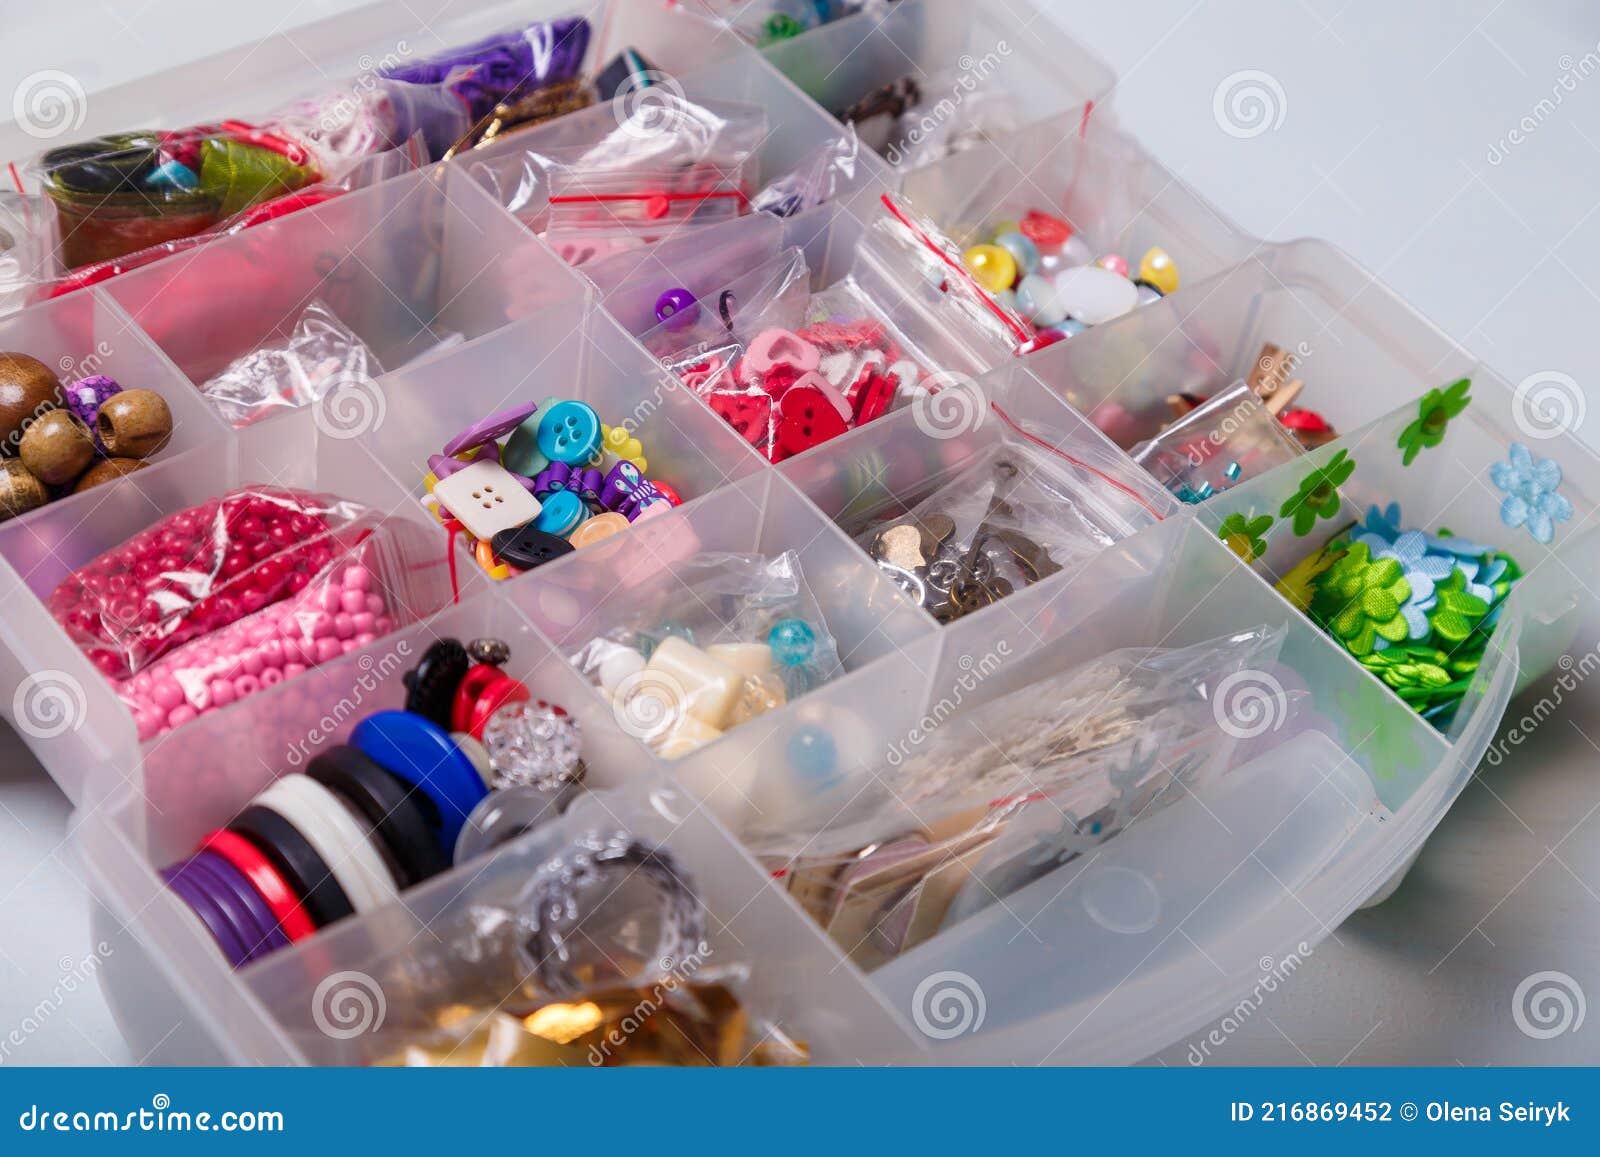 https://thumbs.dreamstime.com/z/beads-organizer-container-buttons-sewing-embroidery-multicolored-set-materials-handcraft-making-bijouterie-close-up-216869452.jpg